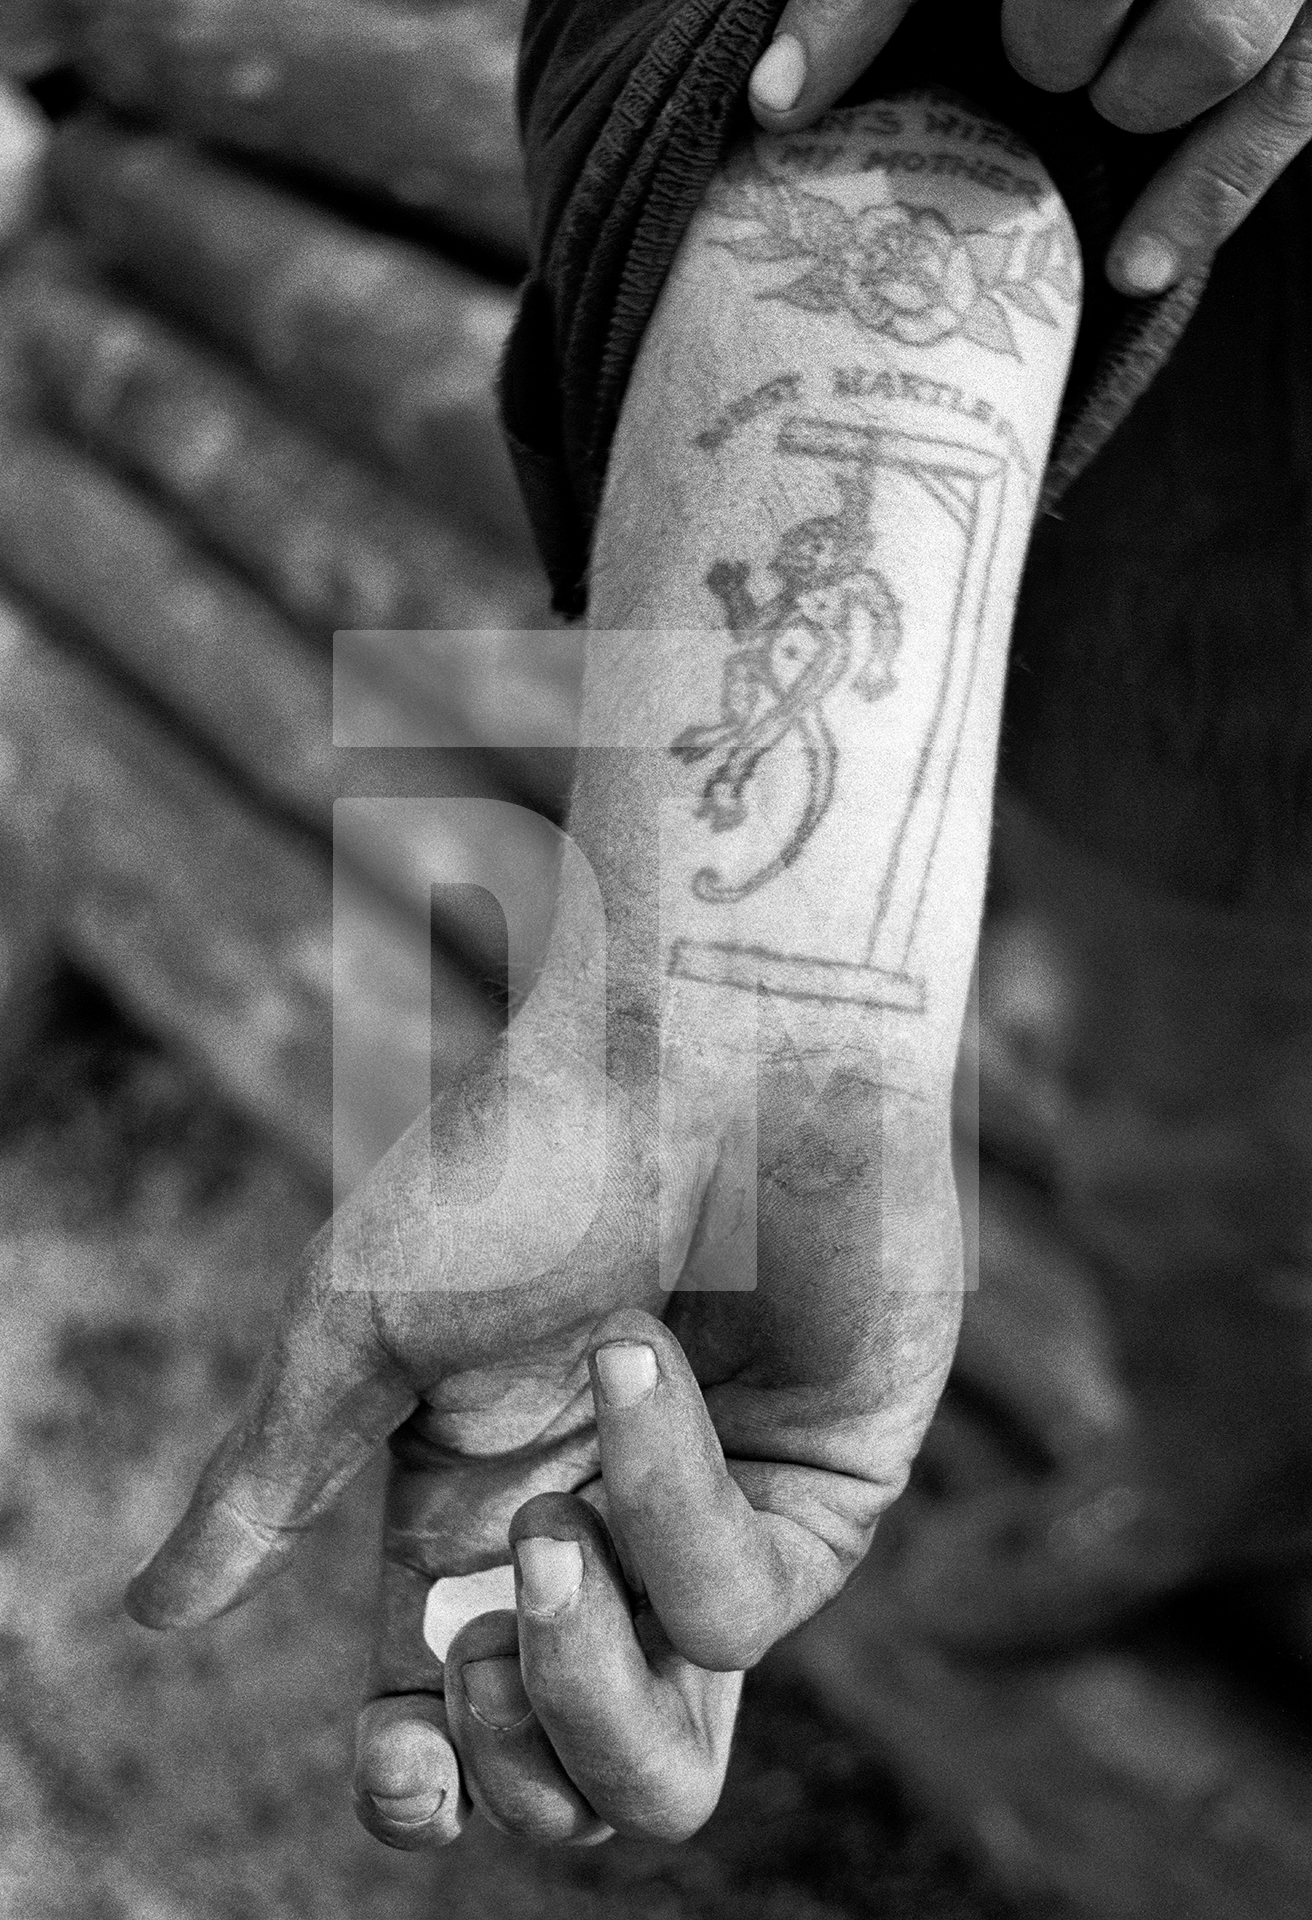 Tattoo of the Hartlepool Monkey. Seaton Carew, Co. Durham. September 1974 by Daniel Meadows